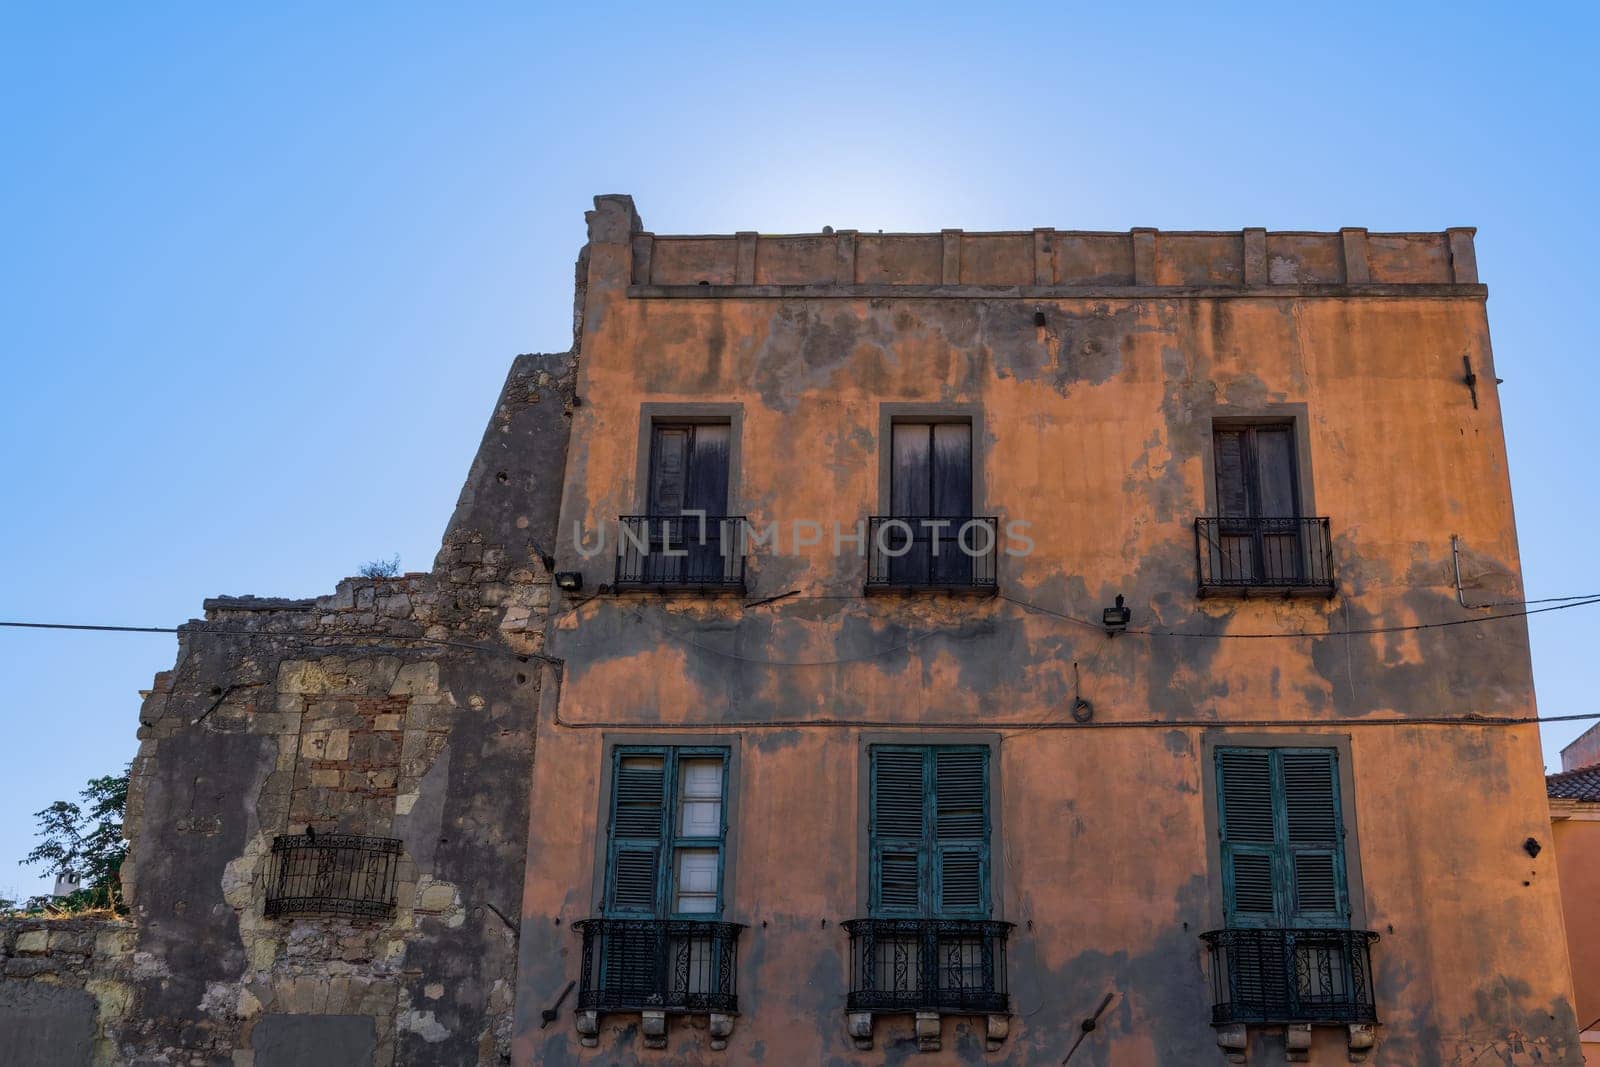 Cagliari citadel old building facade with wooden window shutters, iron balconies and decayed facade in Sardinia Island, Italy.